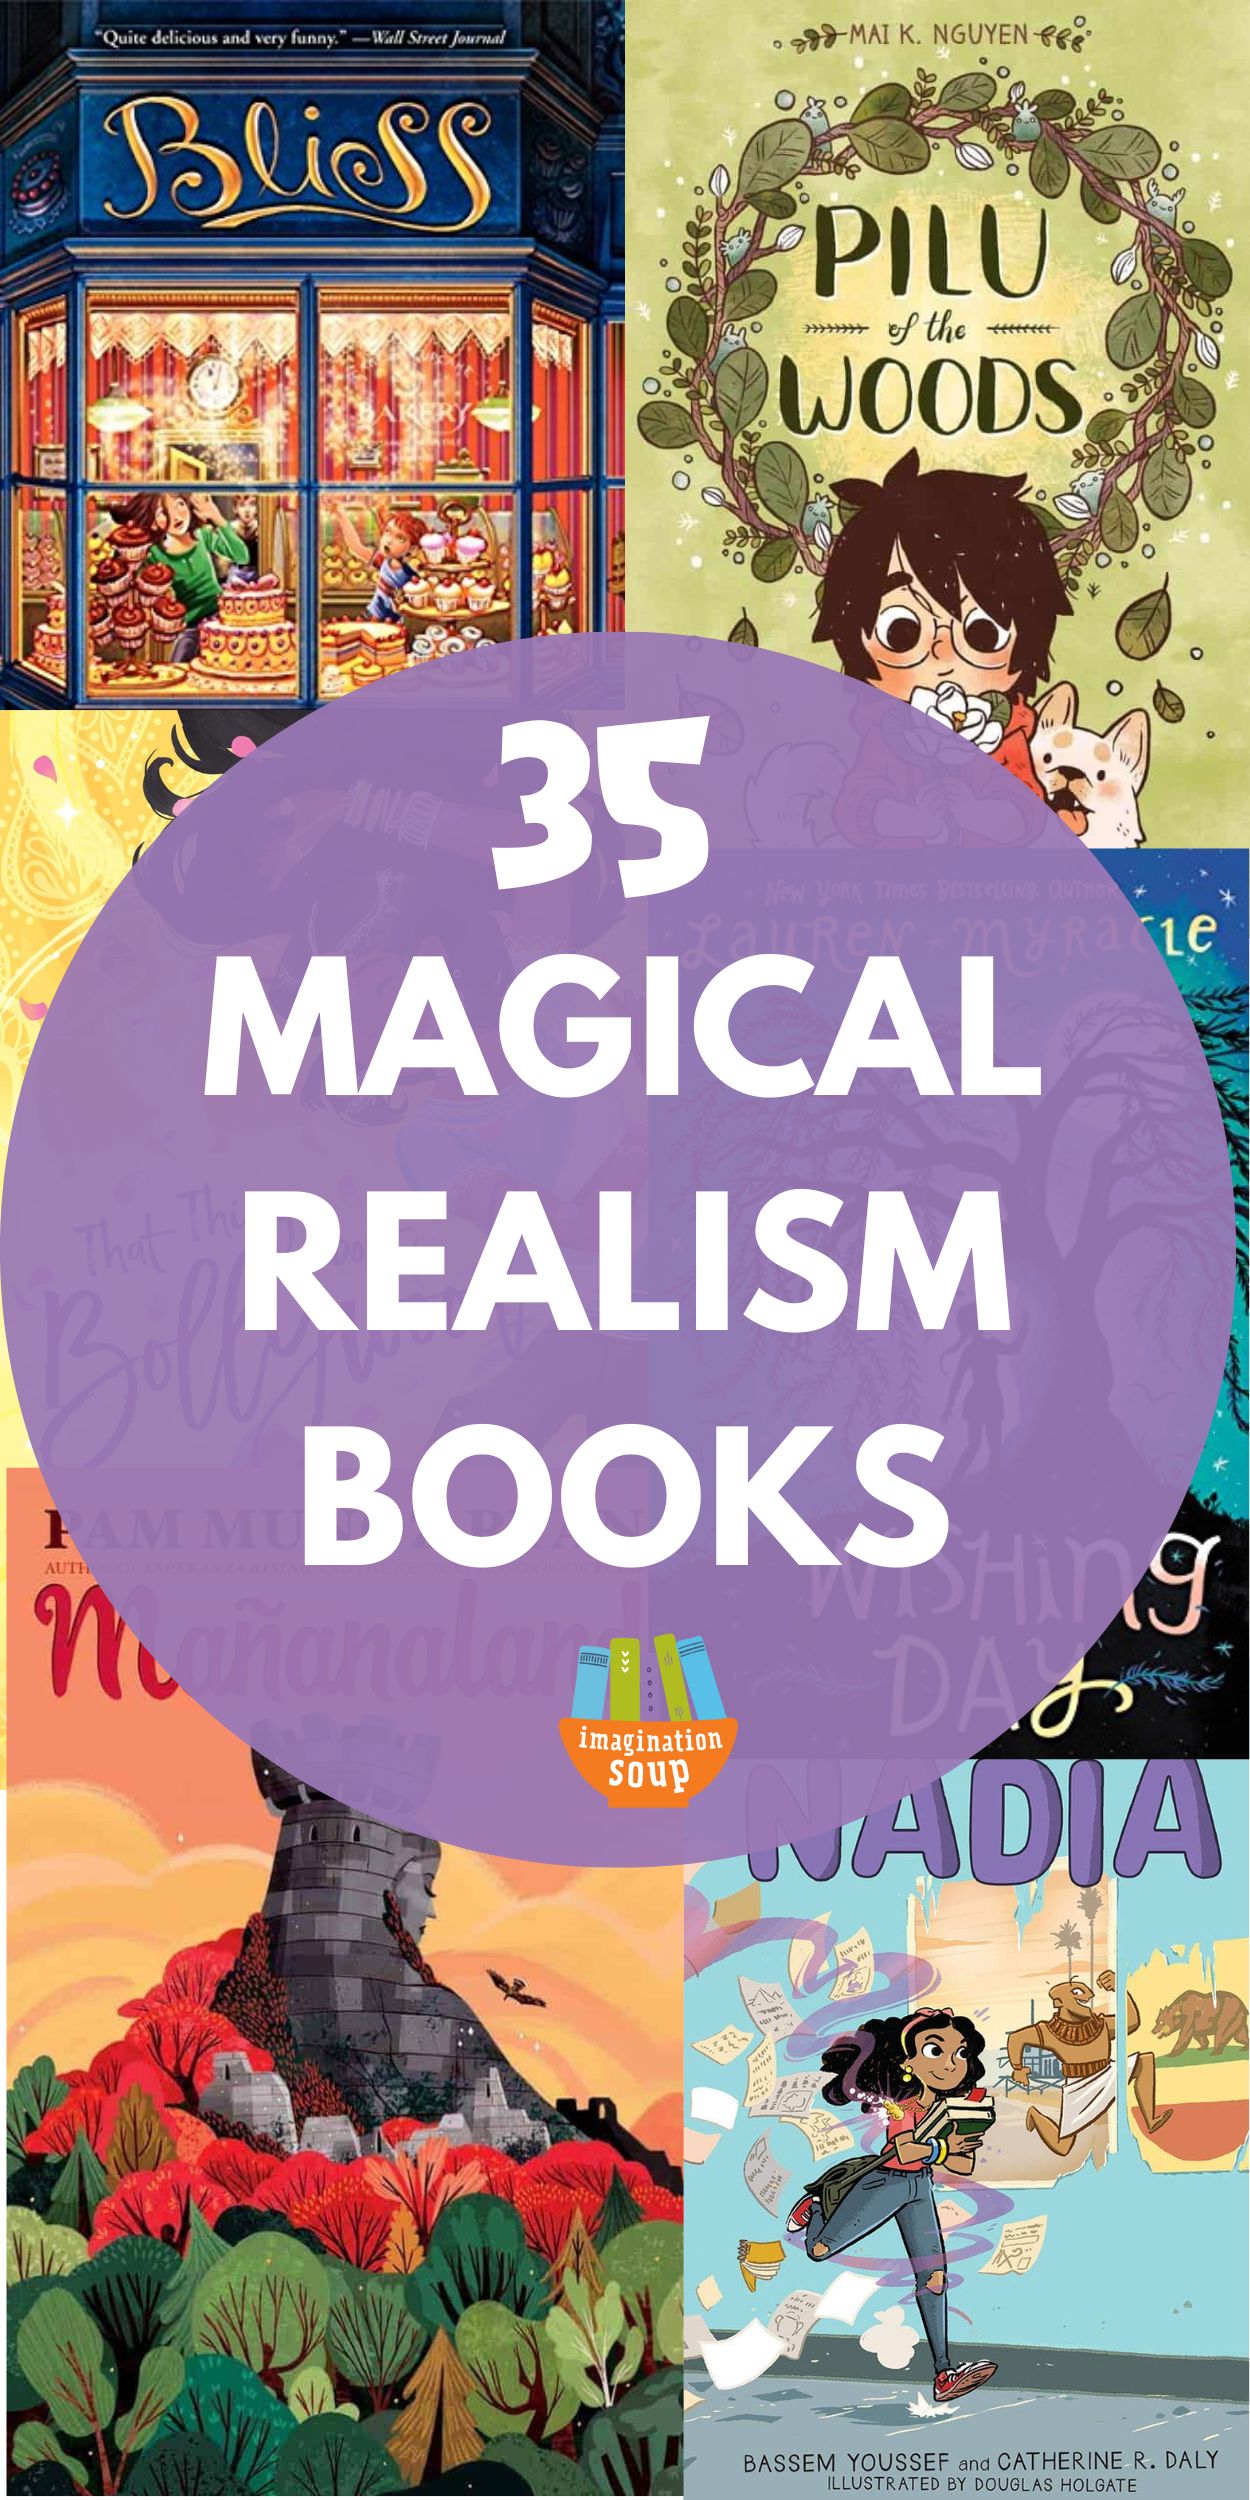 Do your kids love magical realism middle grade books? Magical realism books for tweens are realistic (ish) stories with magical elements. And it's not just for Latin American literature, either. Since magical realism is one of my favorite genres, I'm excited to share my favorite magical realism books for middle grade readers ages 9 to 12.